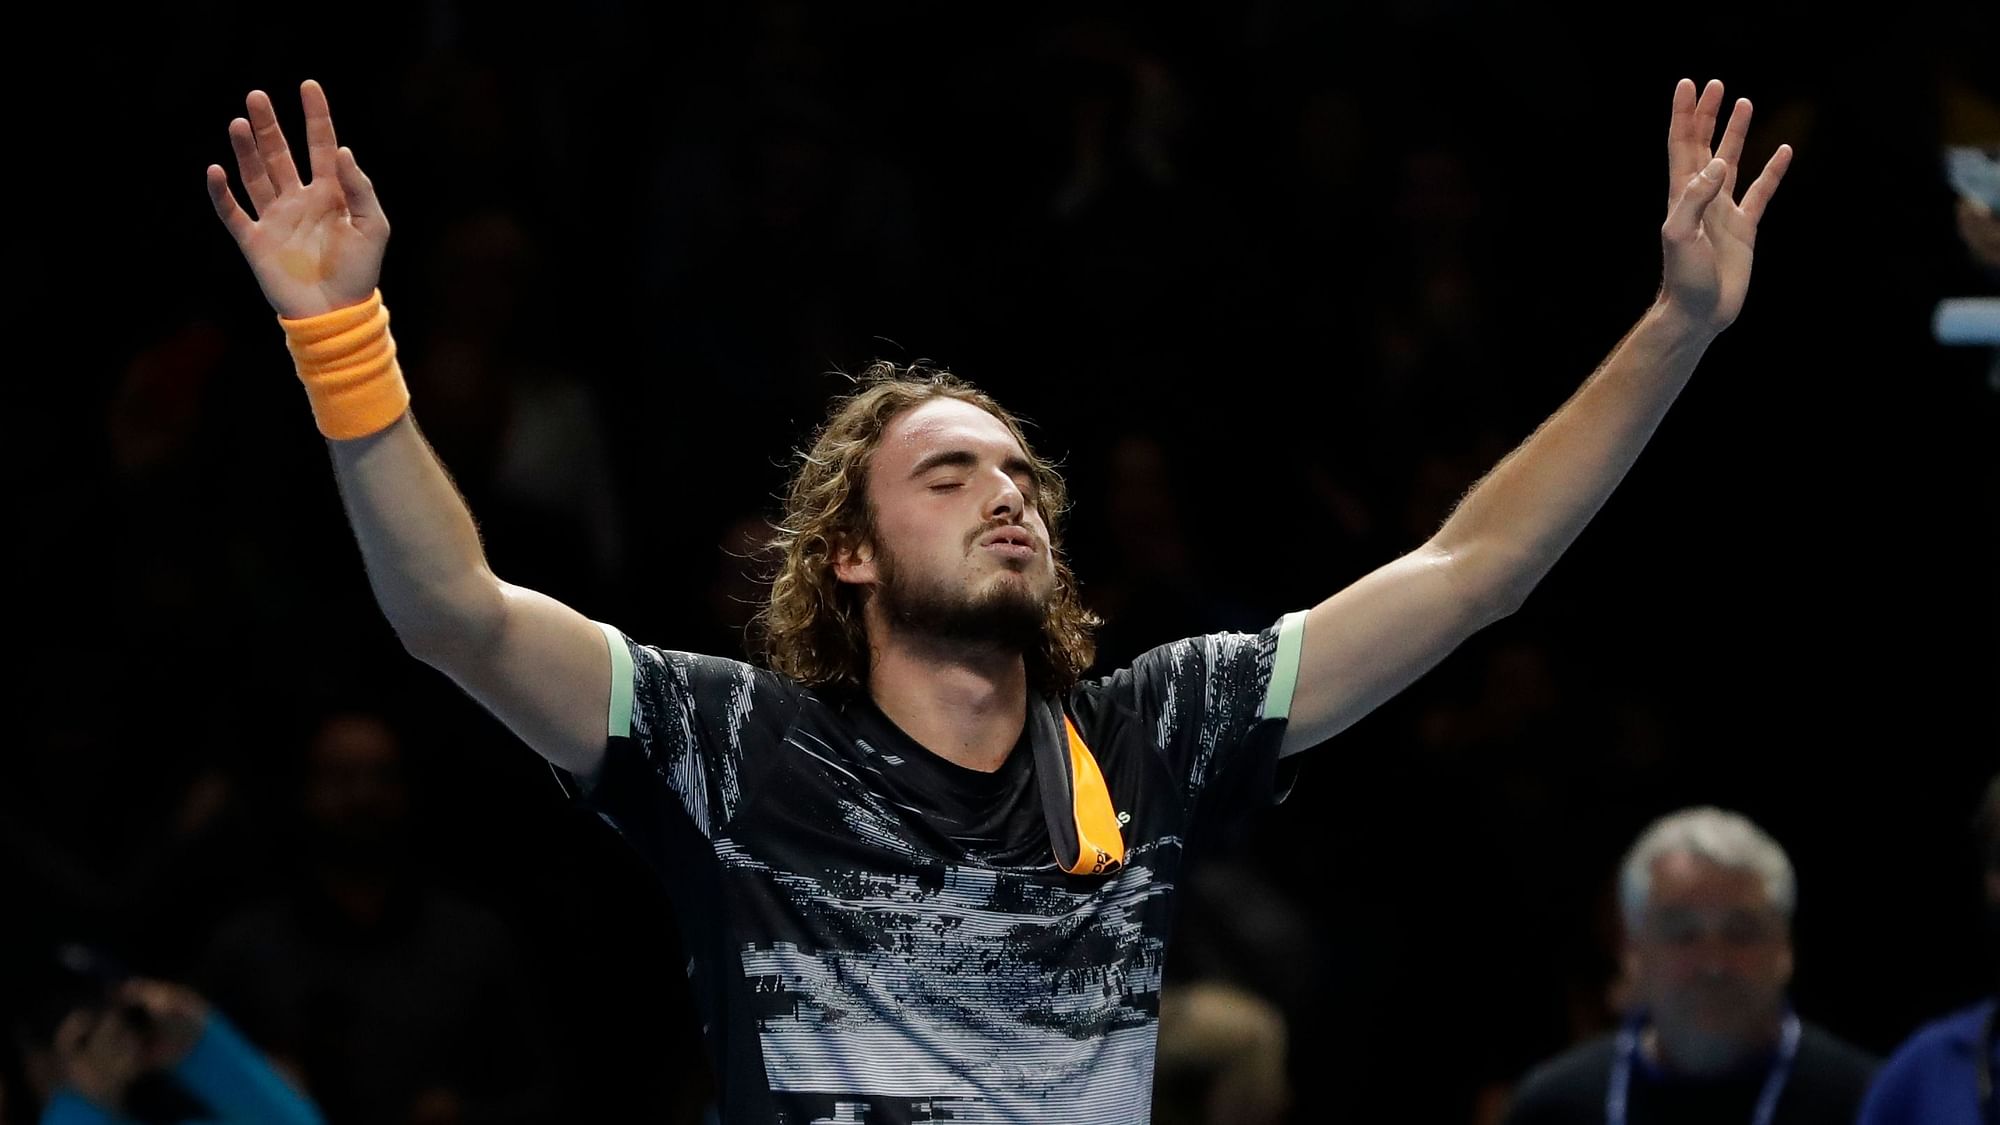 Stefanos Tsitsipas of Greece reacts after defeating Austria’s Dominic Thiem to win their ATP World Finals singles final tennis match at the O2 arena in London.